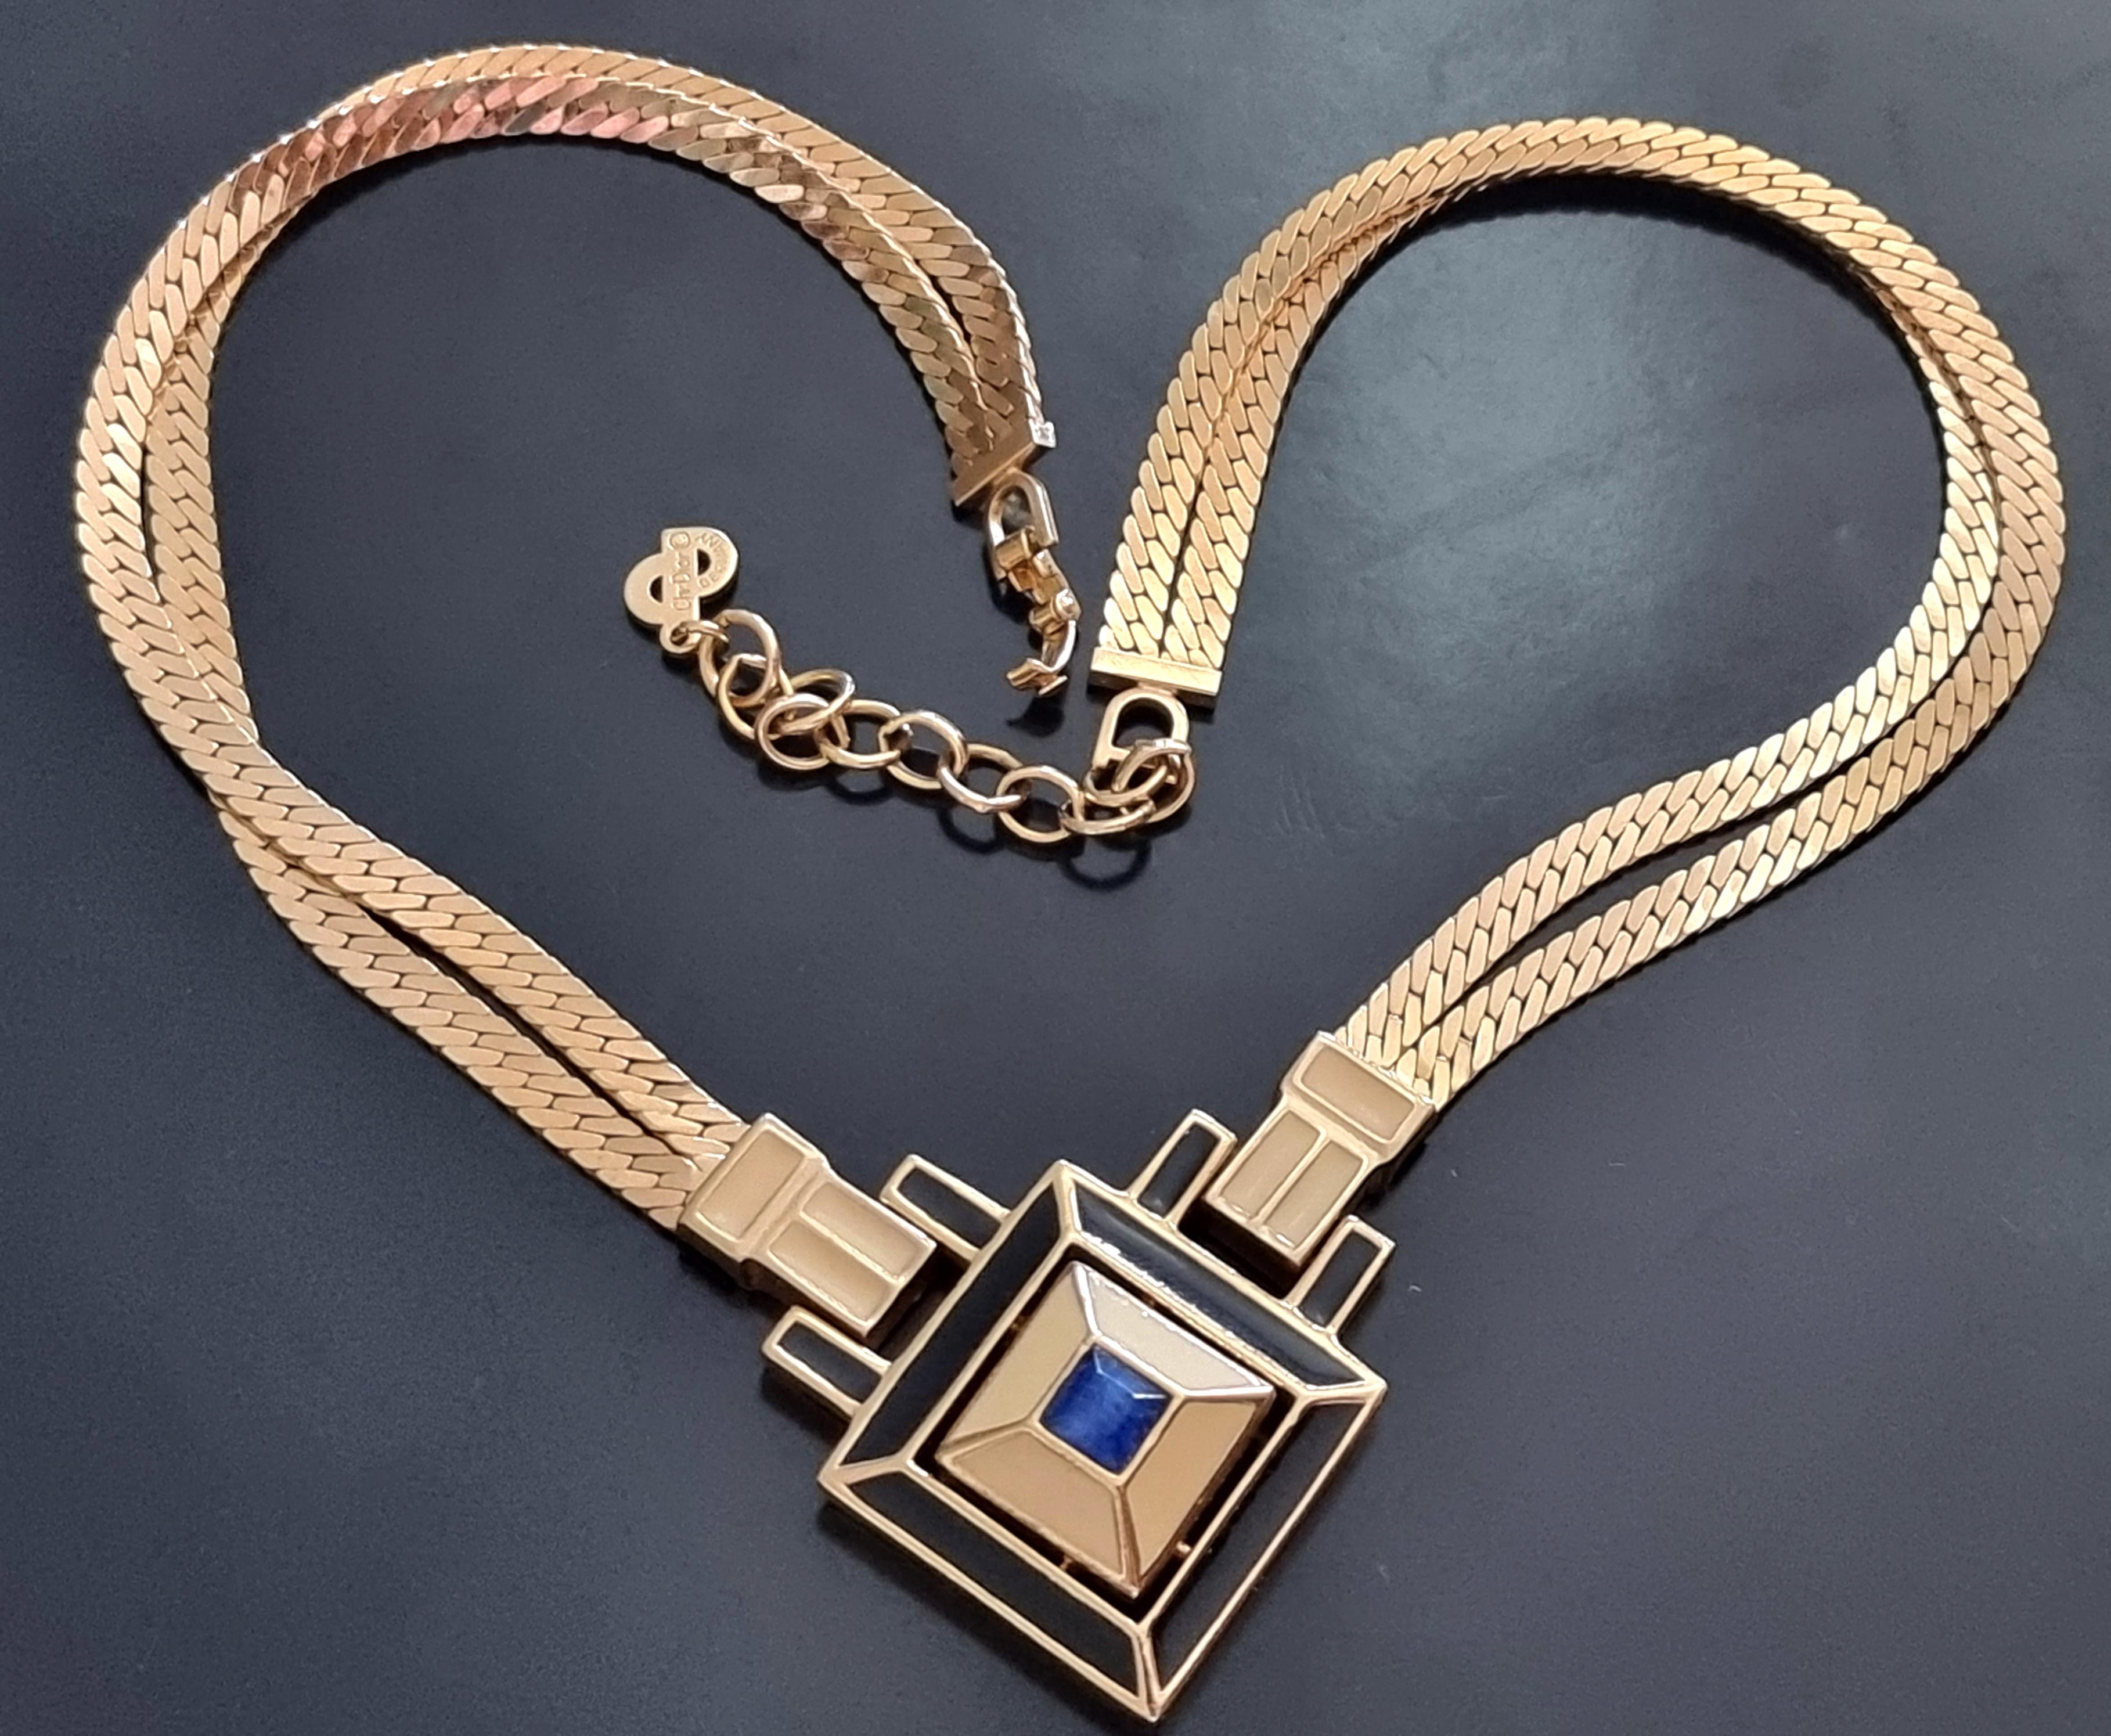 Sublime and extremely rare old NECKLACE,
By French haute couture designer CHRISTIAN DIOR,
Vintage,
Sign,
total length 44 cm, pendant 4 x 4 cm, weight 58 g,
Very good state.

Dior was born in Granville, on the Normandy coast, in 1905.
His parents,